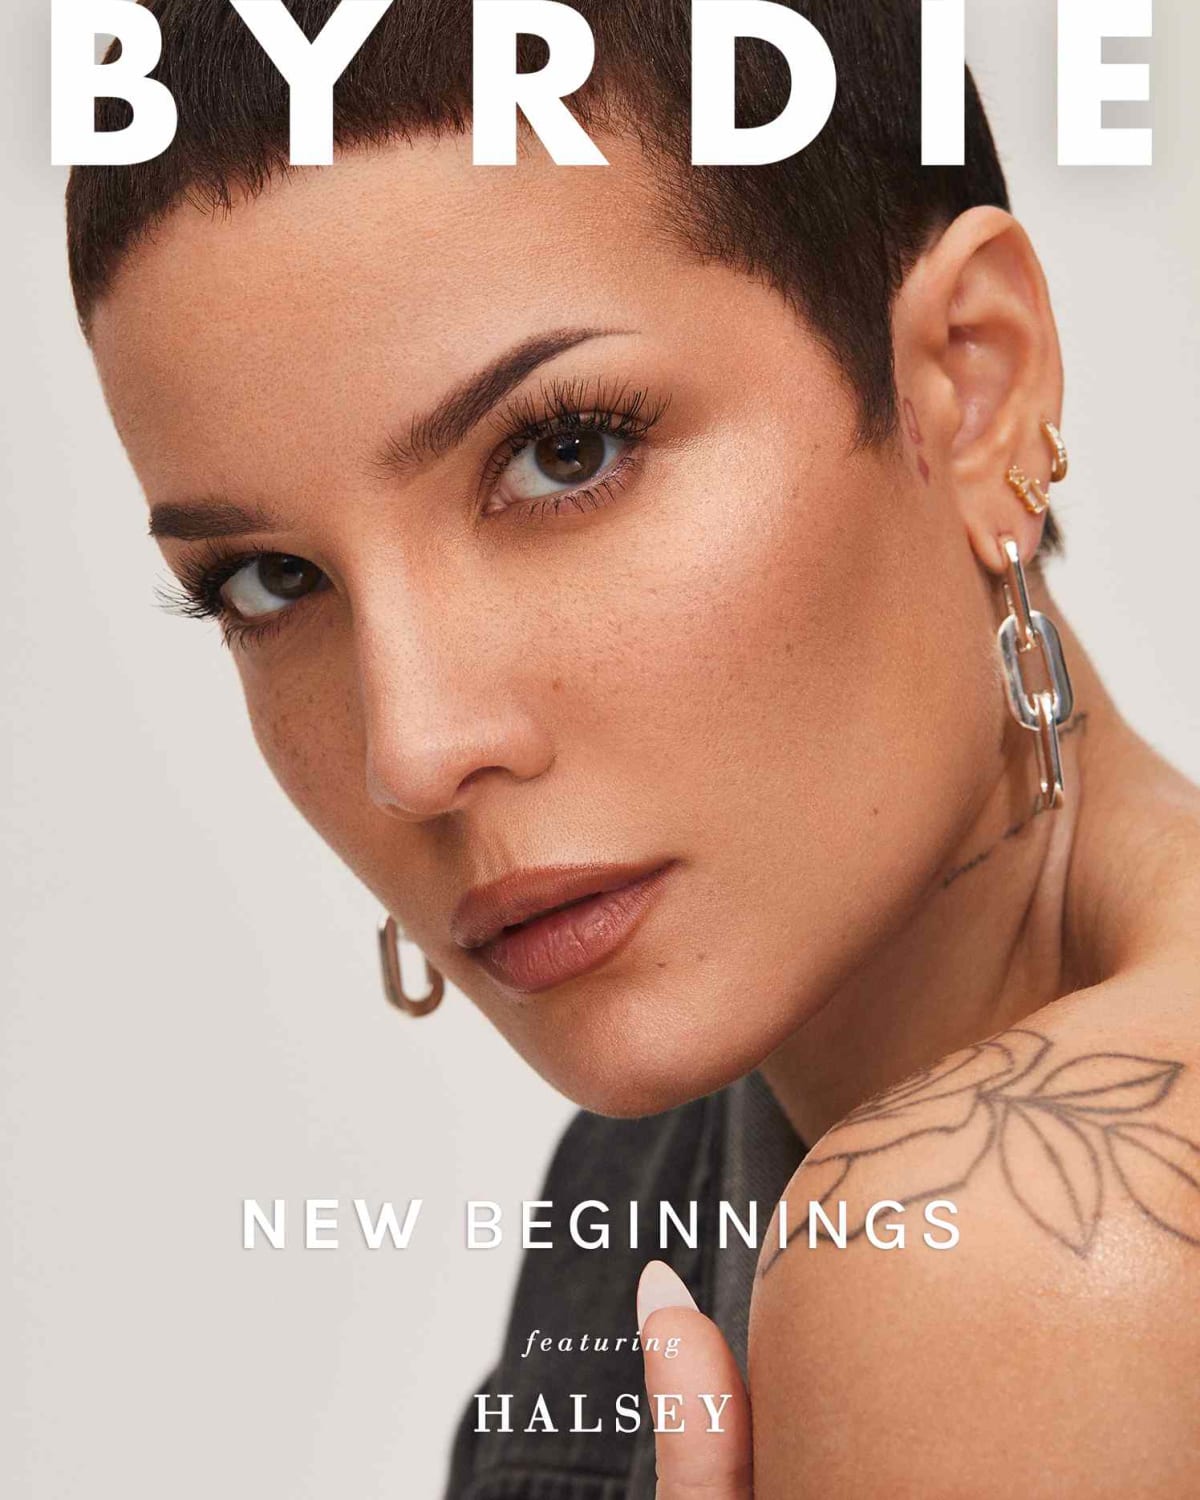 The Winter Issue ft. Halsey